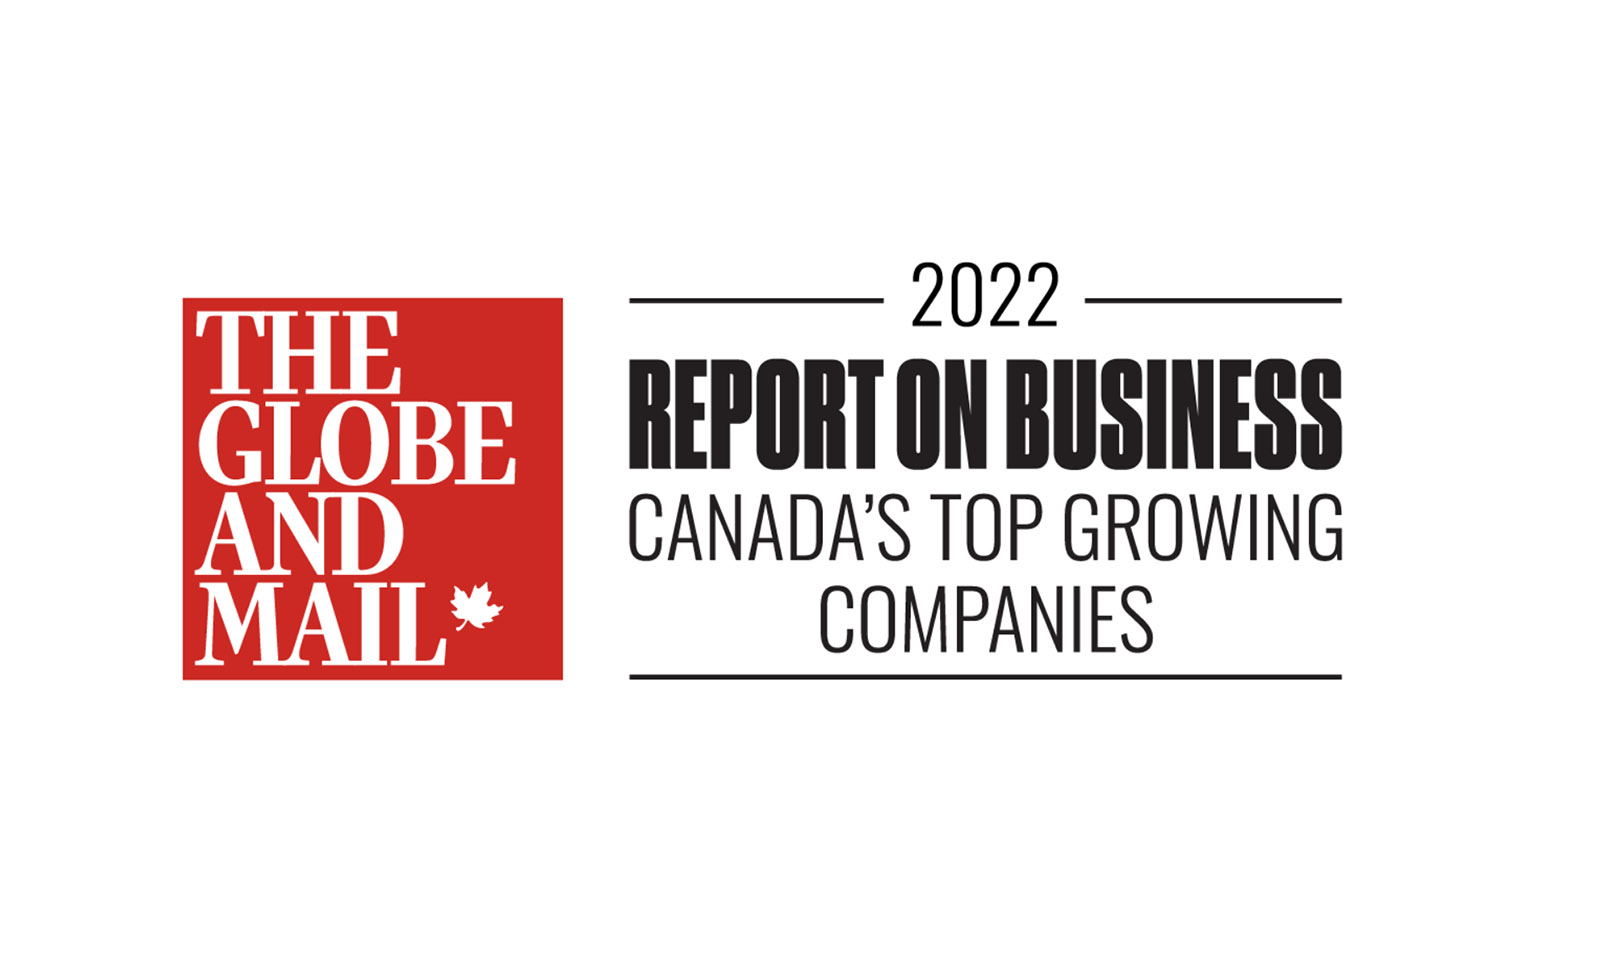 The Globe and Mail’s “Report on Business” ranking of Canada’s Top Growing Companies in 2022